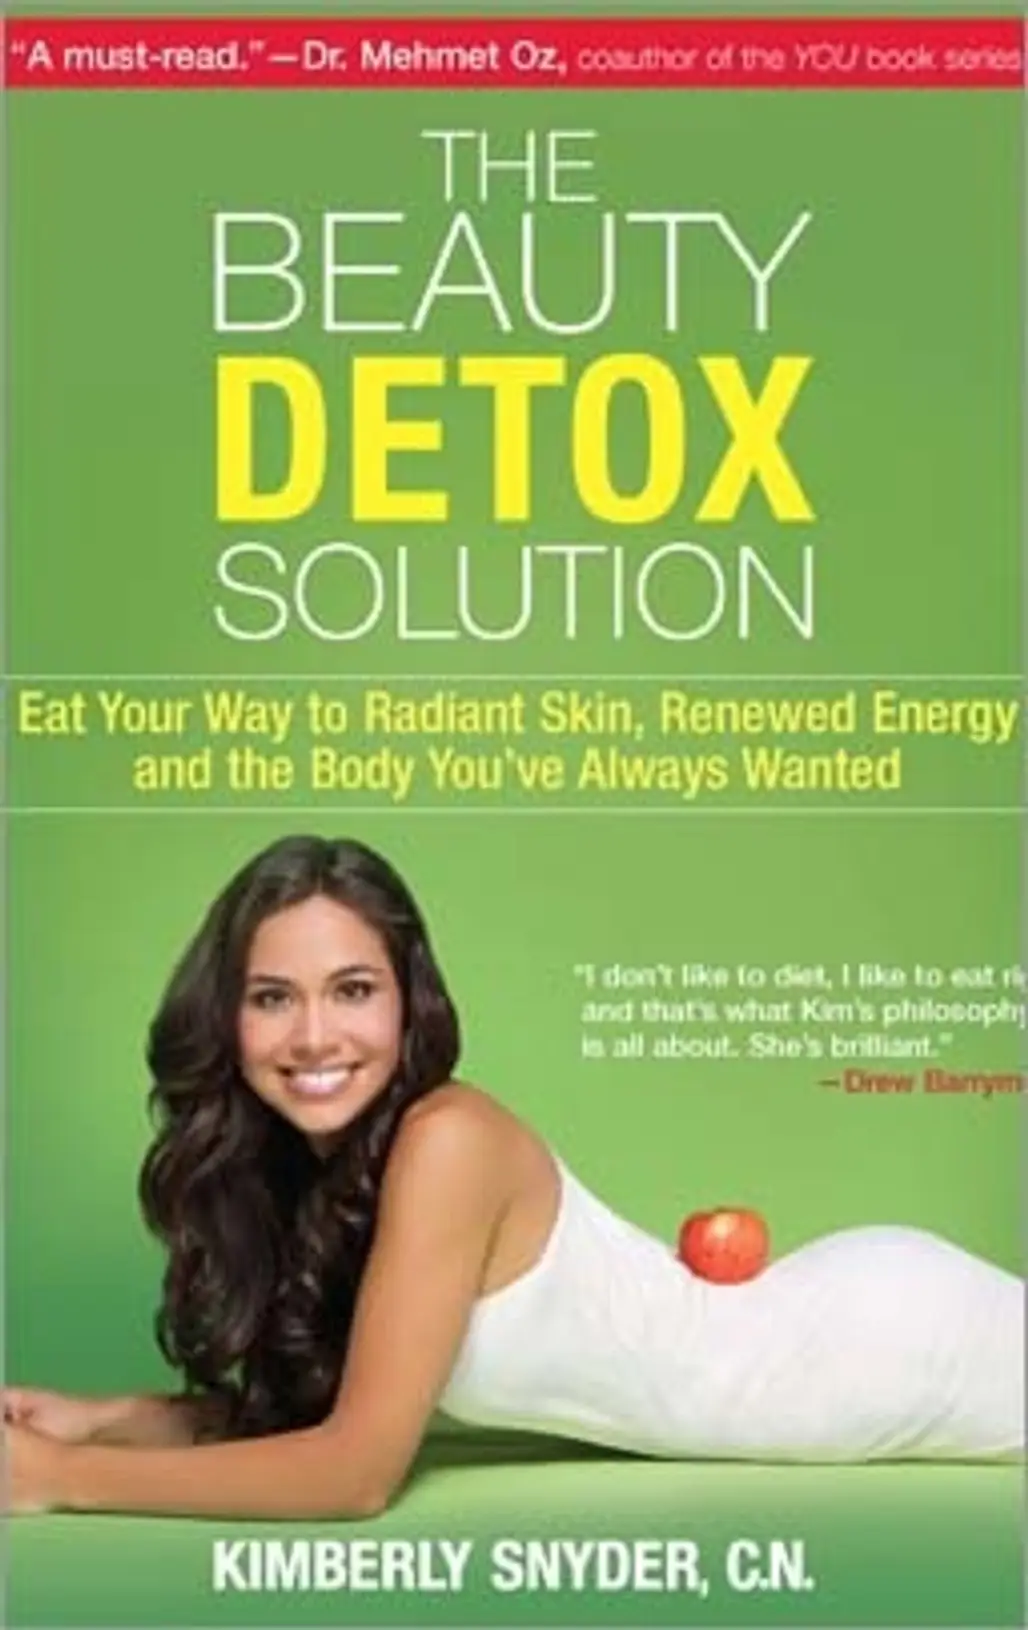 The Beauty Detox Solution by Kimberly Snyder